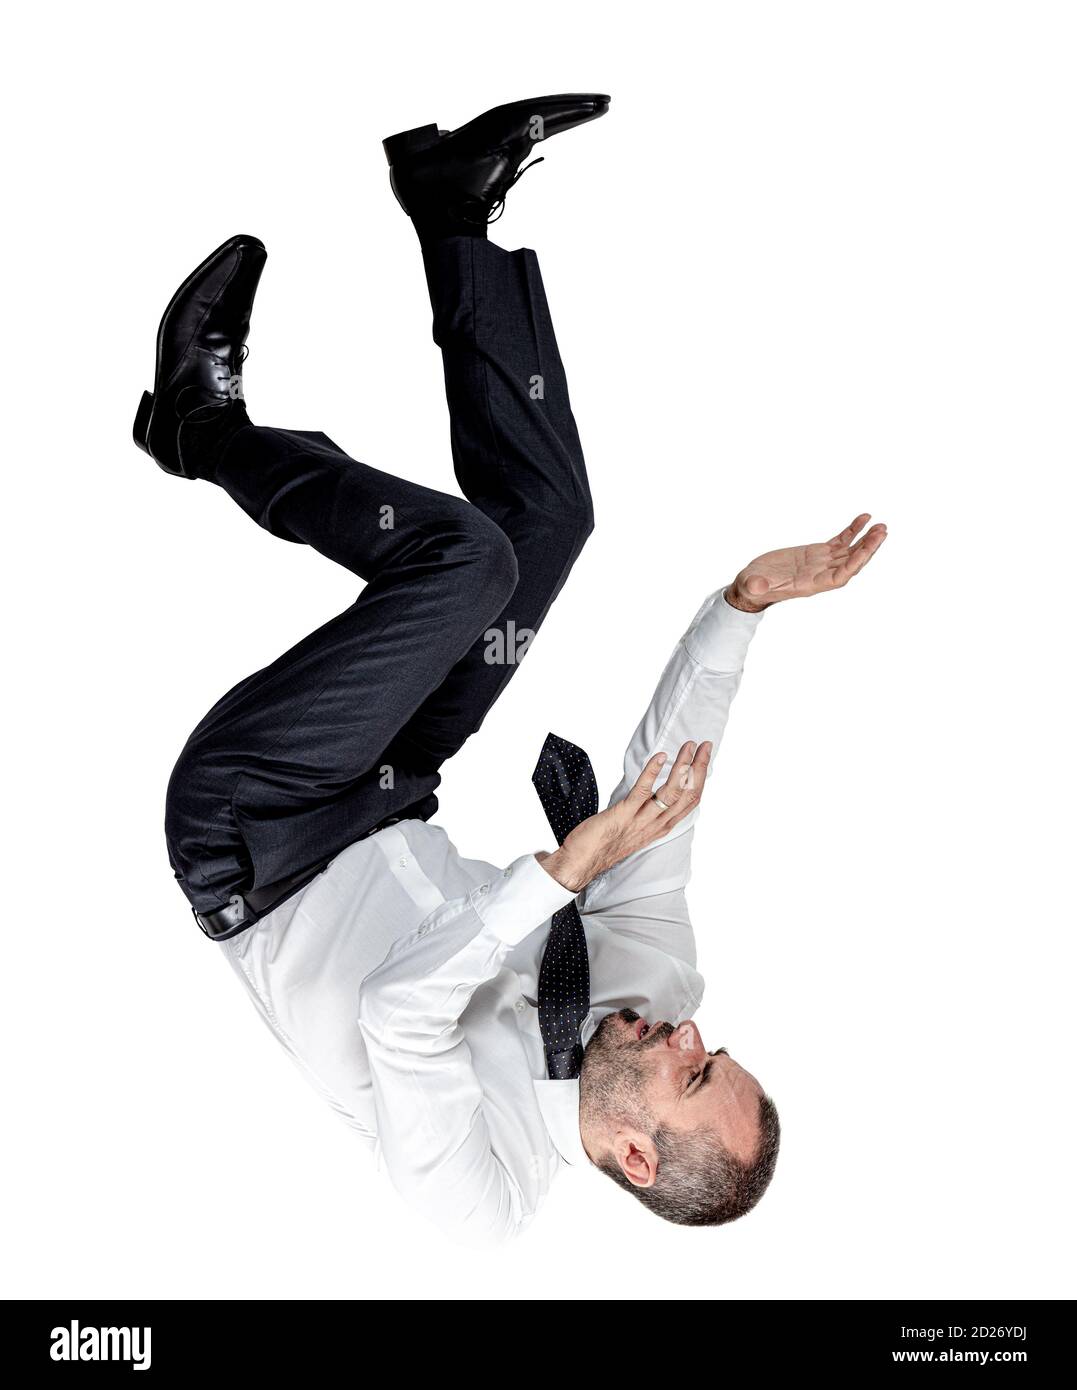 Falling Down Stock Photos - 136,945 Images